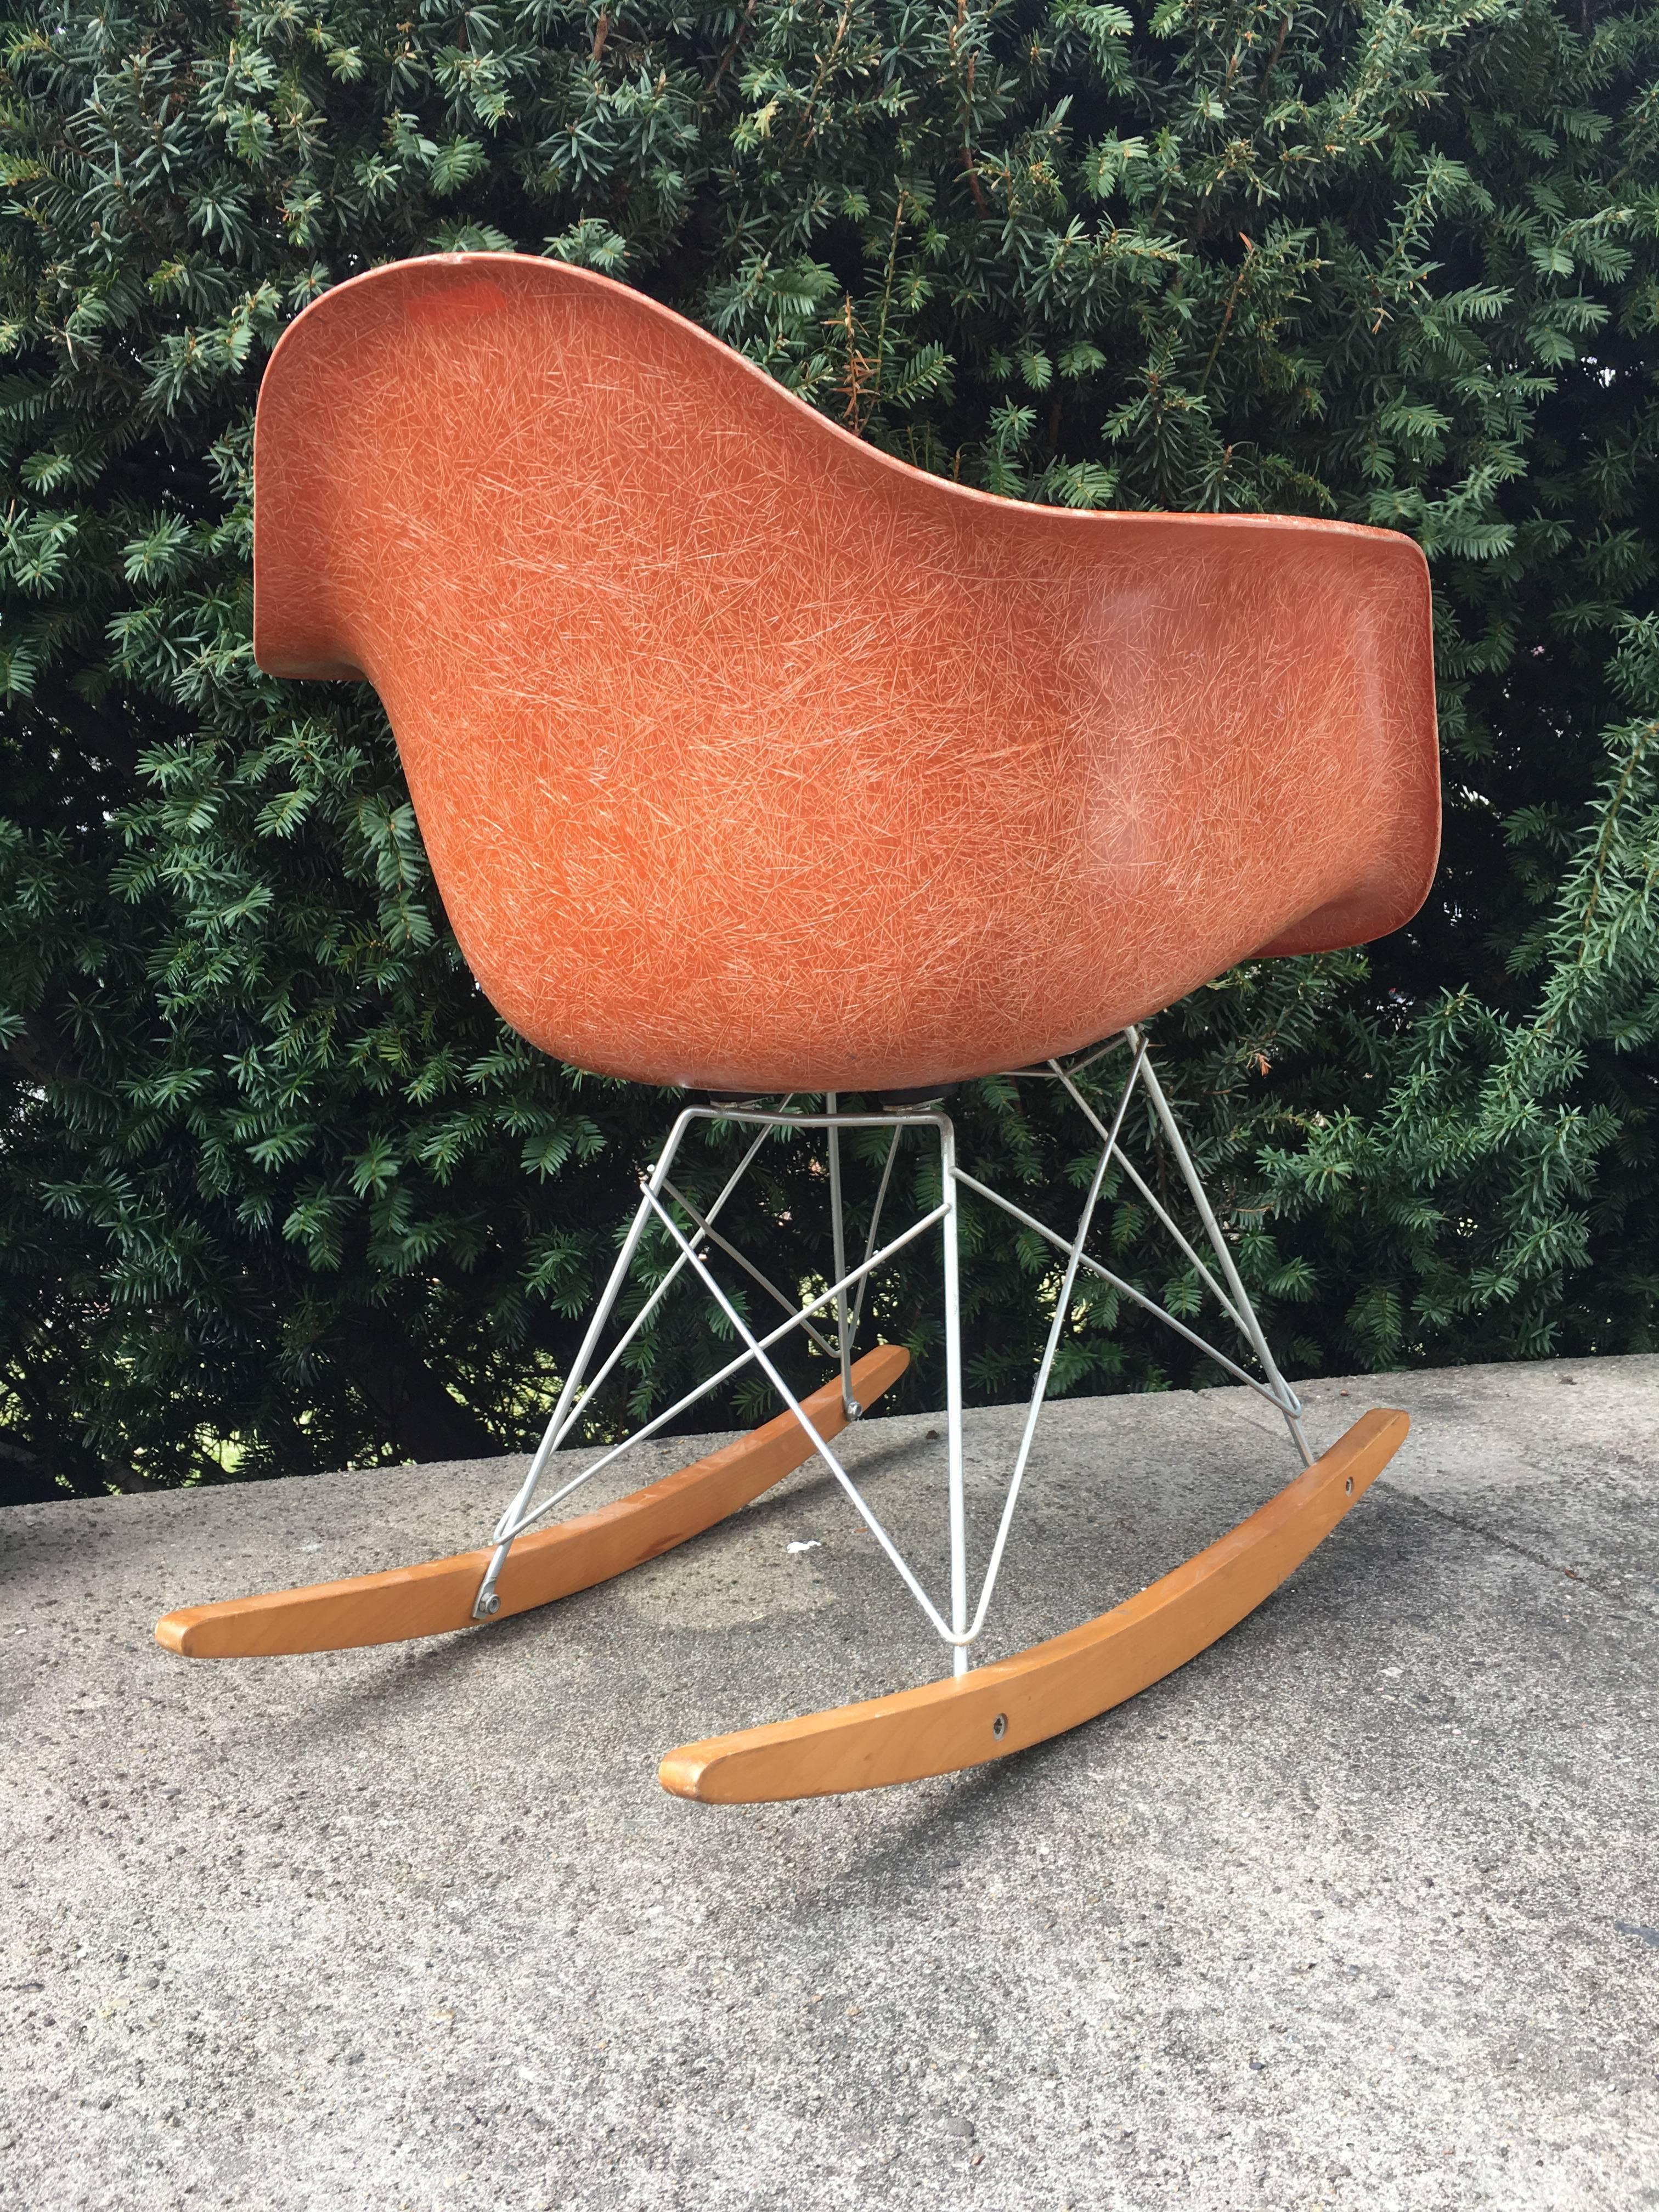 Herman Miller Eames terra cotta RAR rocking chair. Extremely rare color. Gorgeous strong fibers. Vintage Herman Miller base in excellent original condition.